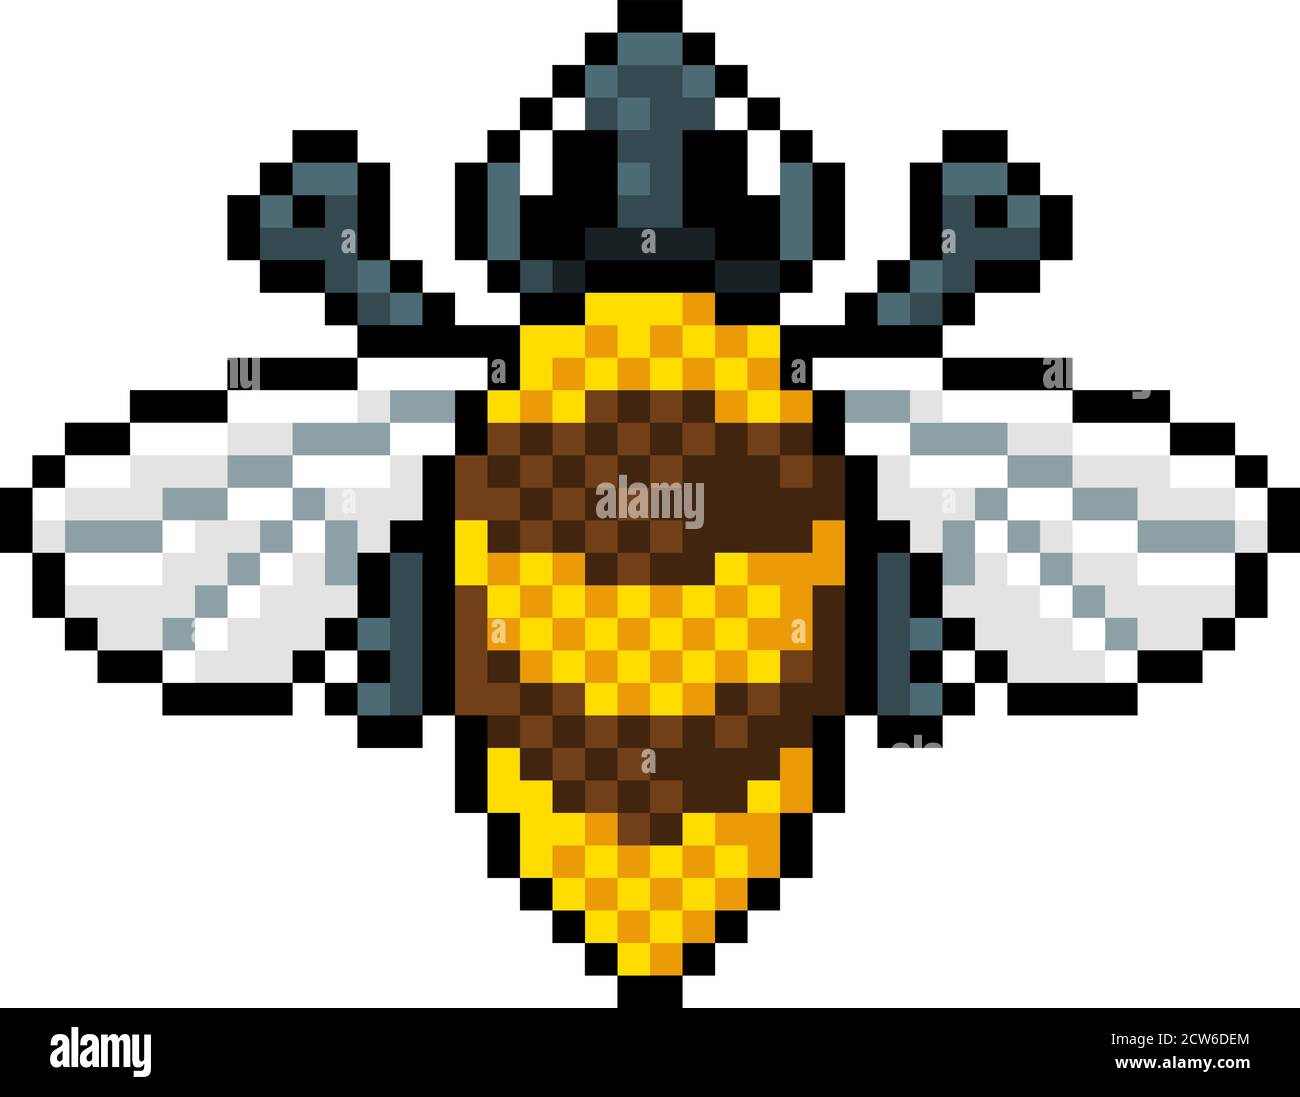 Bumble Bee Bug Insect pixel Art Video Game icona Illustrazione Vettoriale